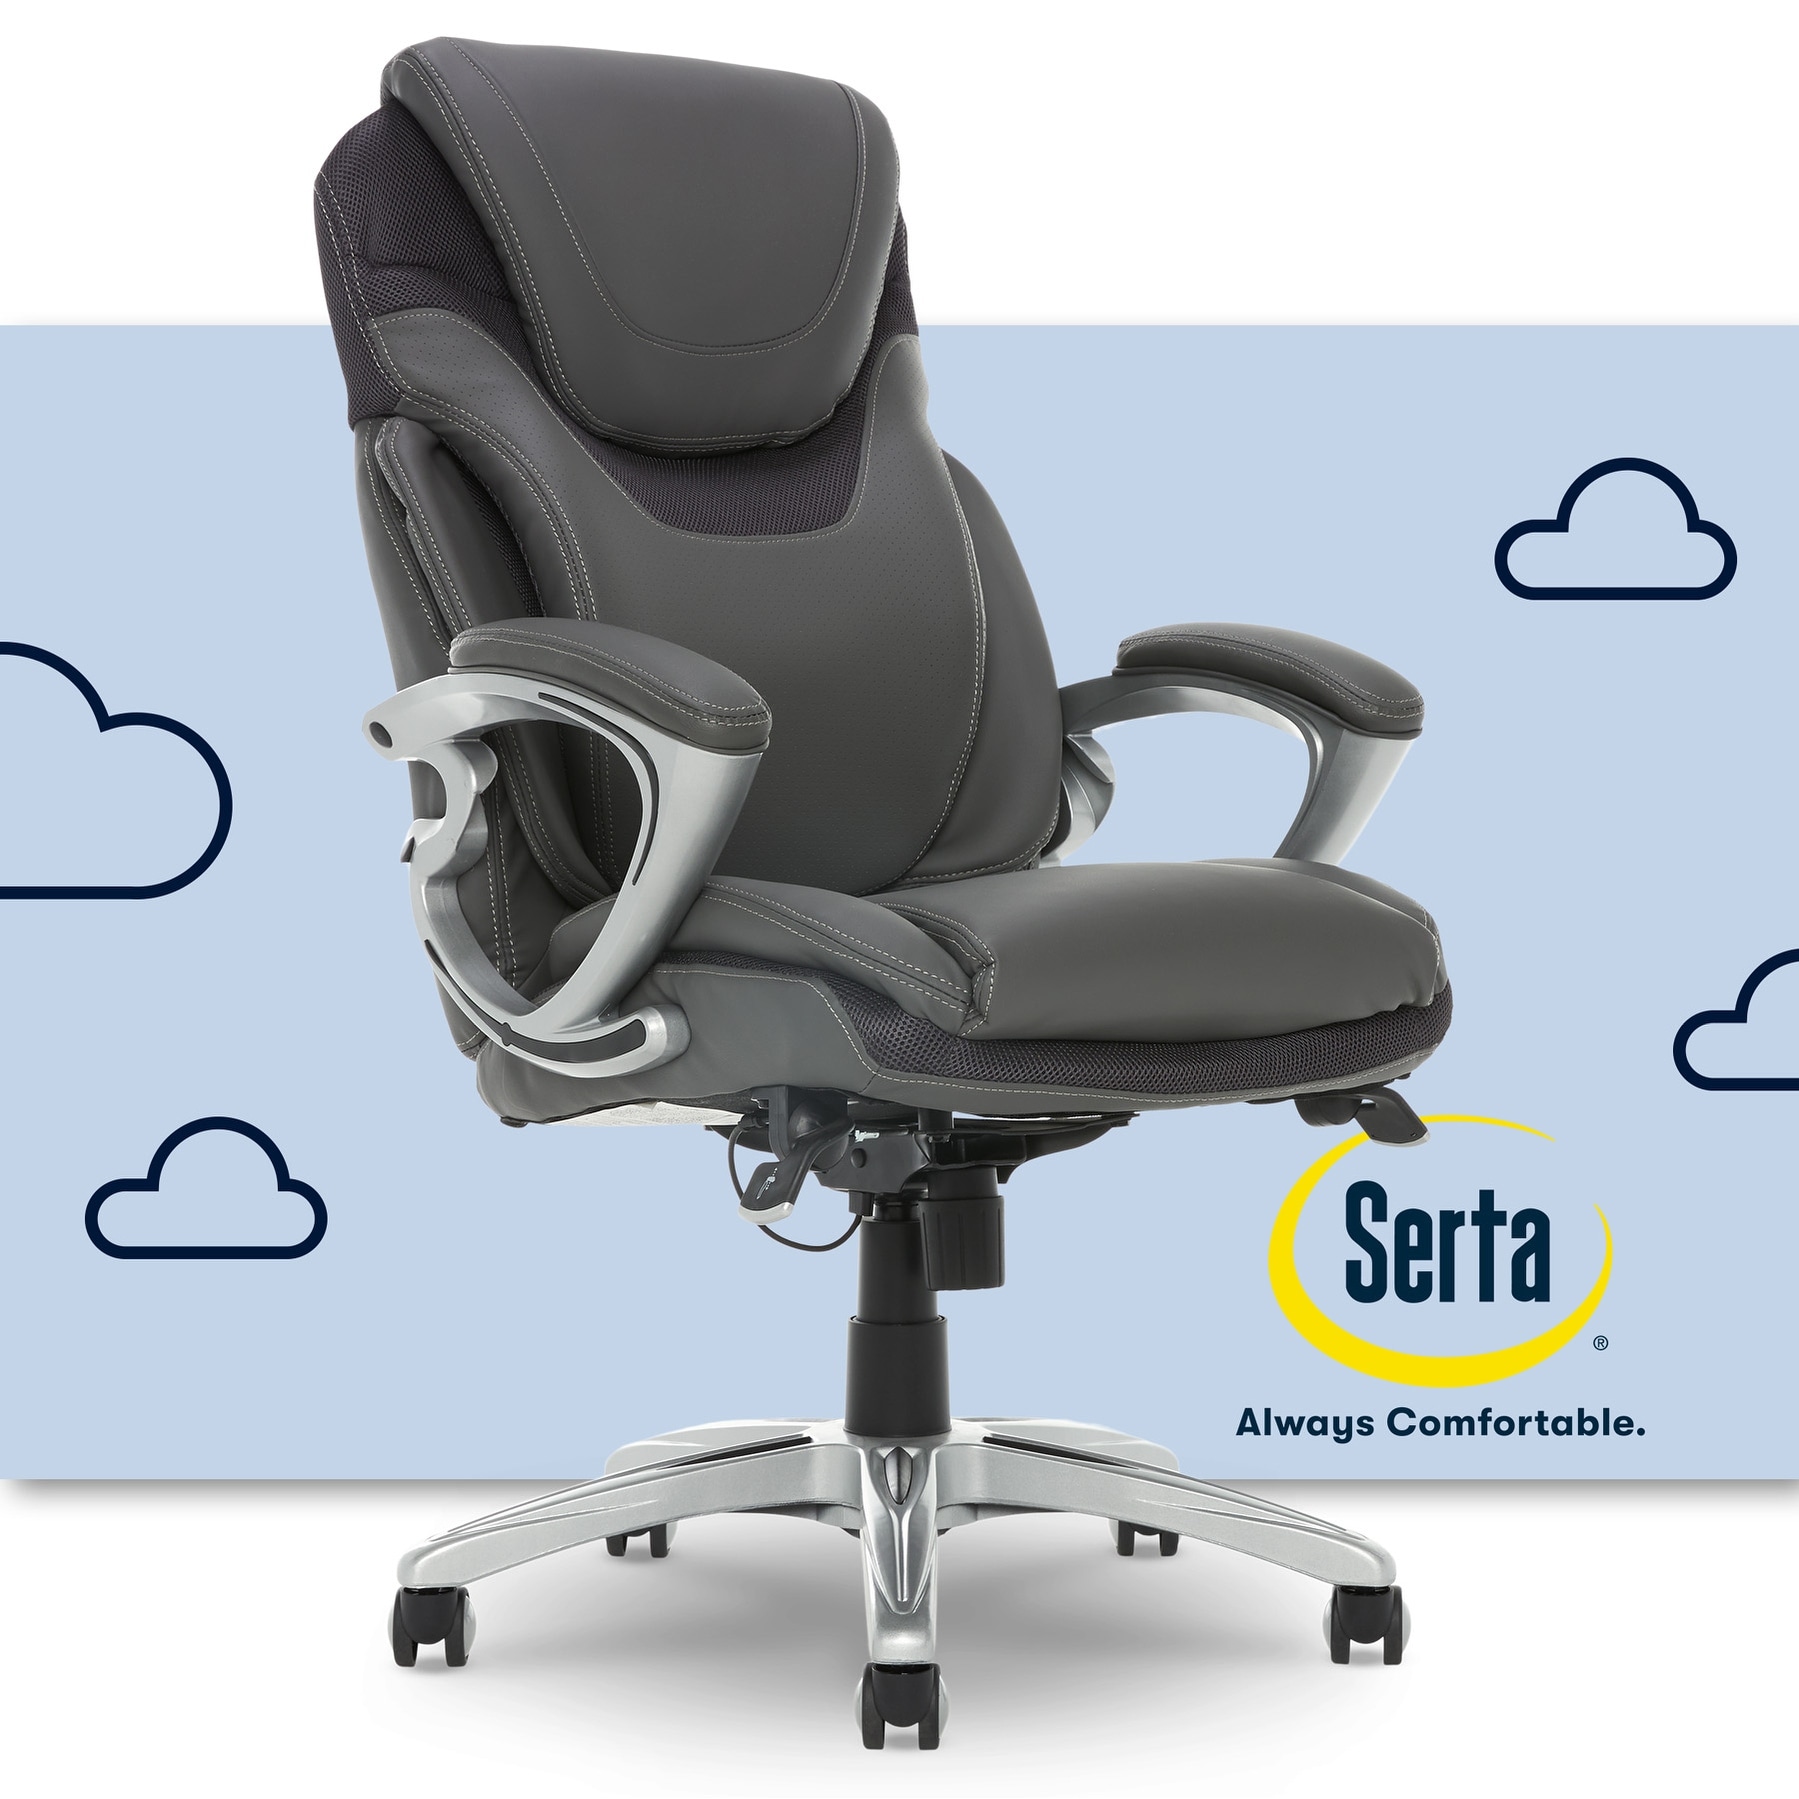 Serta Connor Upholstered Executive High-Back Office Chair with